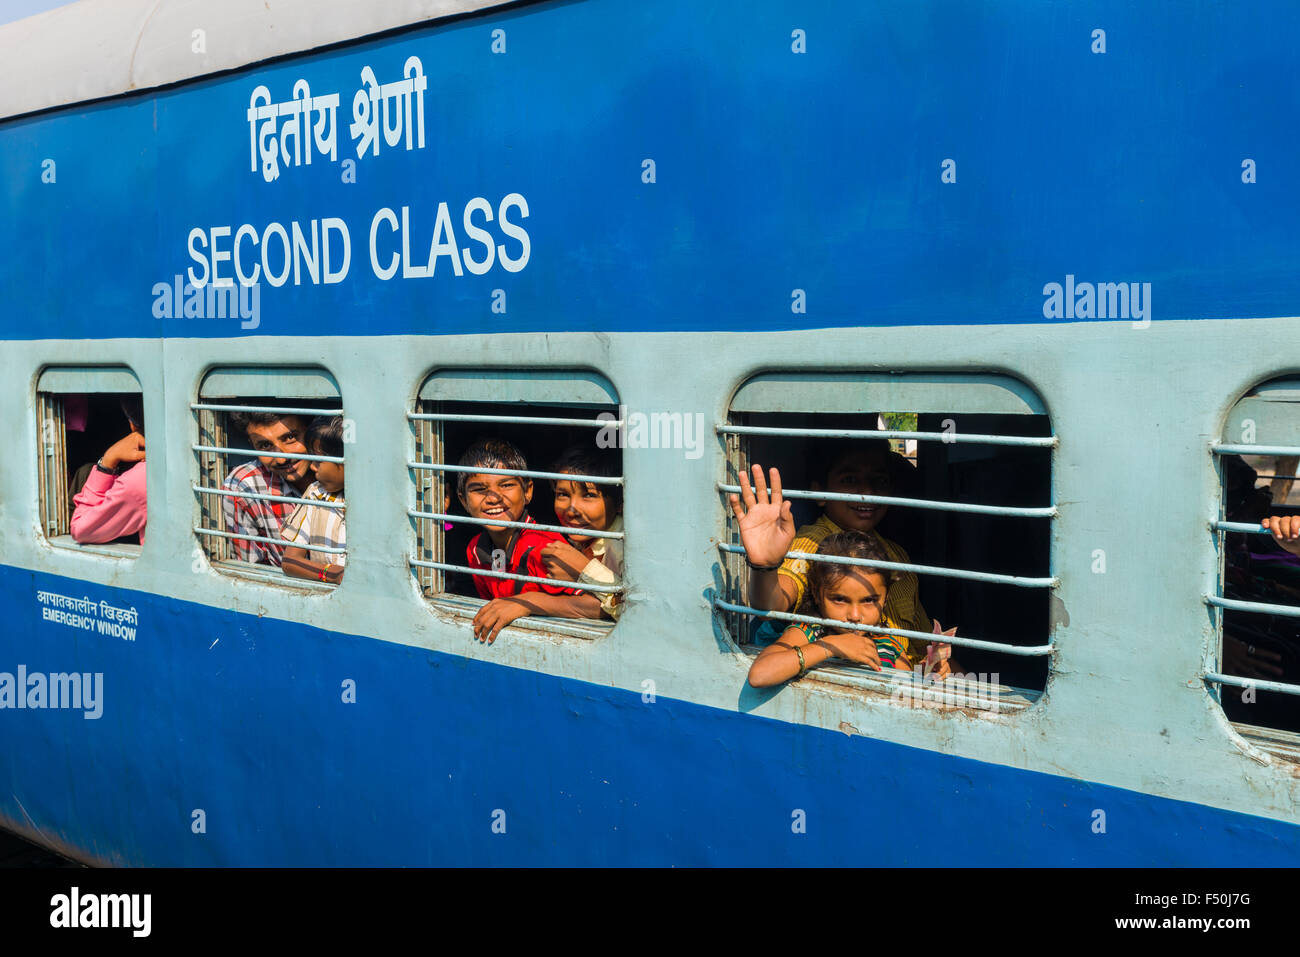 A blue colored train coach of Indian Railways with 'Second Class' written on it, passengers are looking out of the windows behin Stock Photo